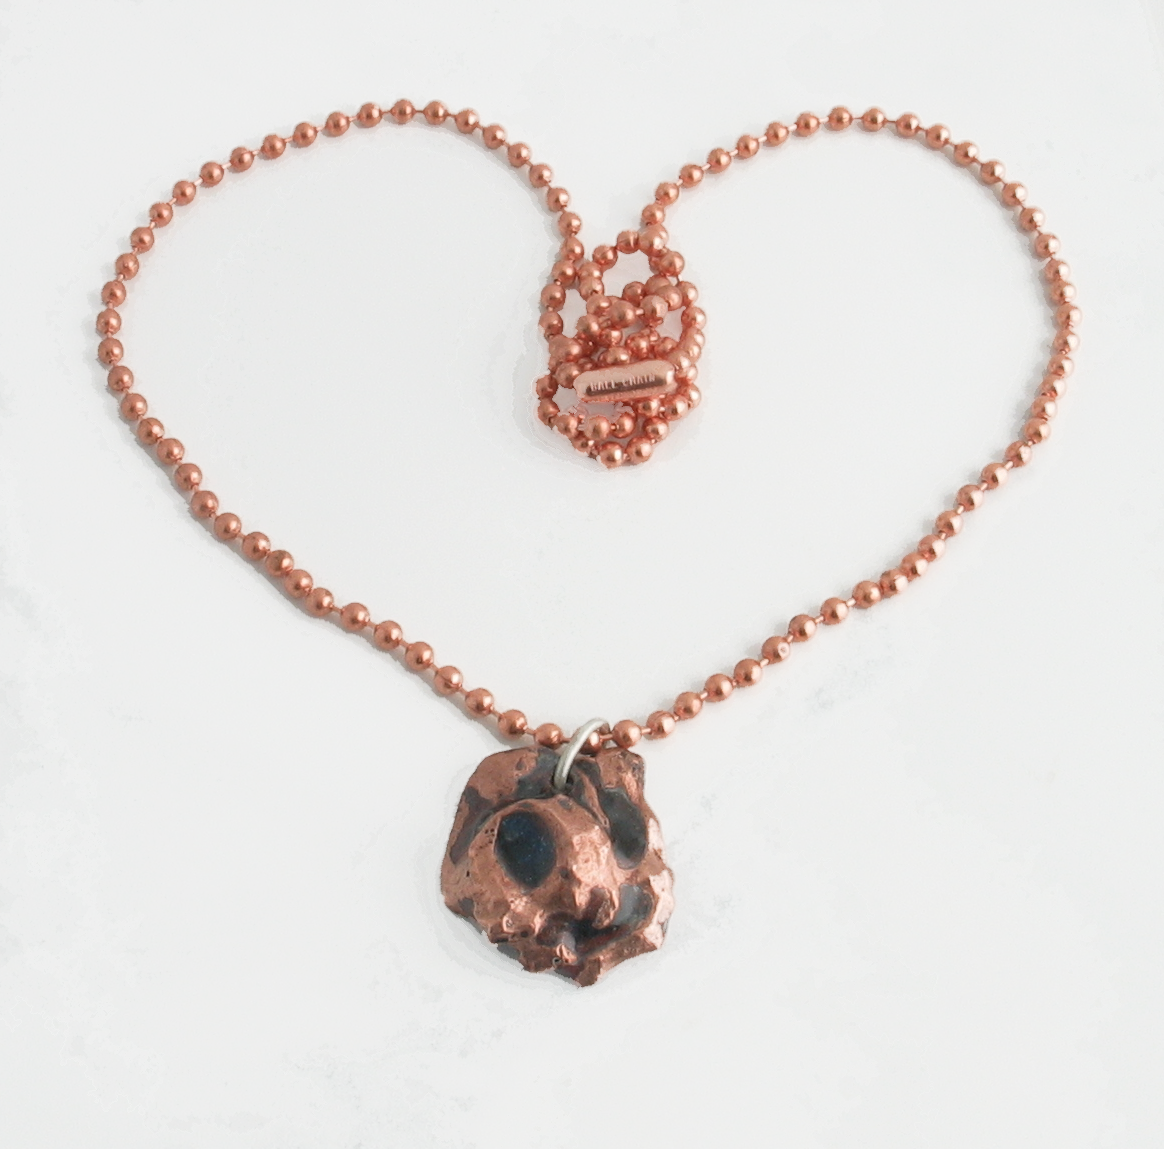 Chunky solid copper forged nugget pendant with vitreous enamel glass, on 24" copper ball chain.